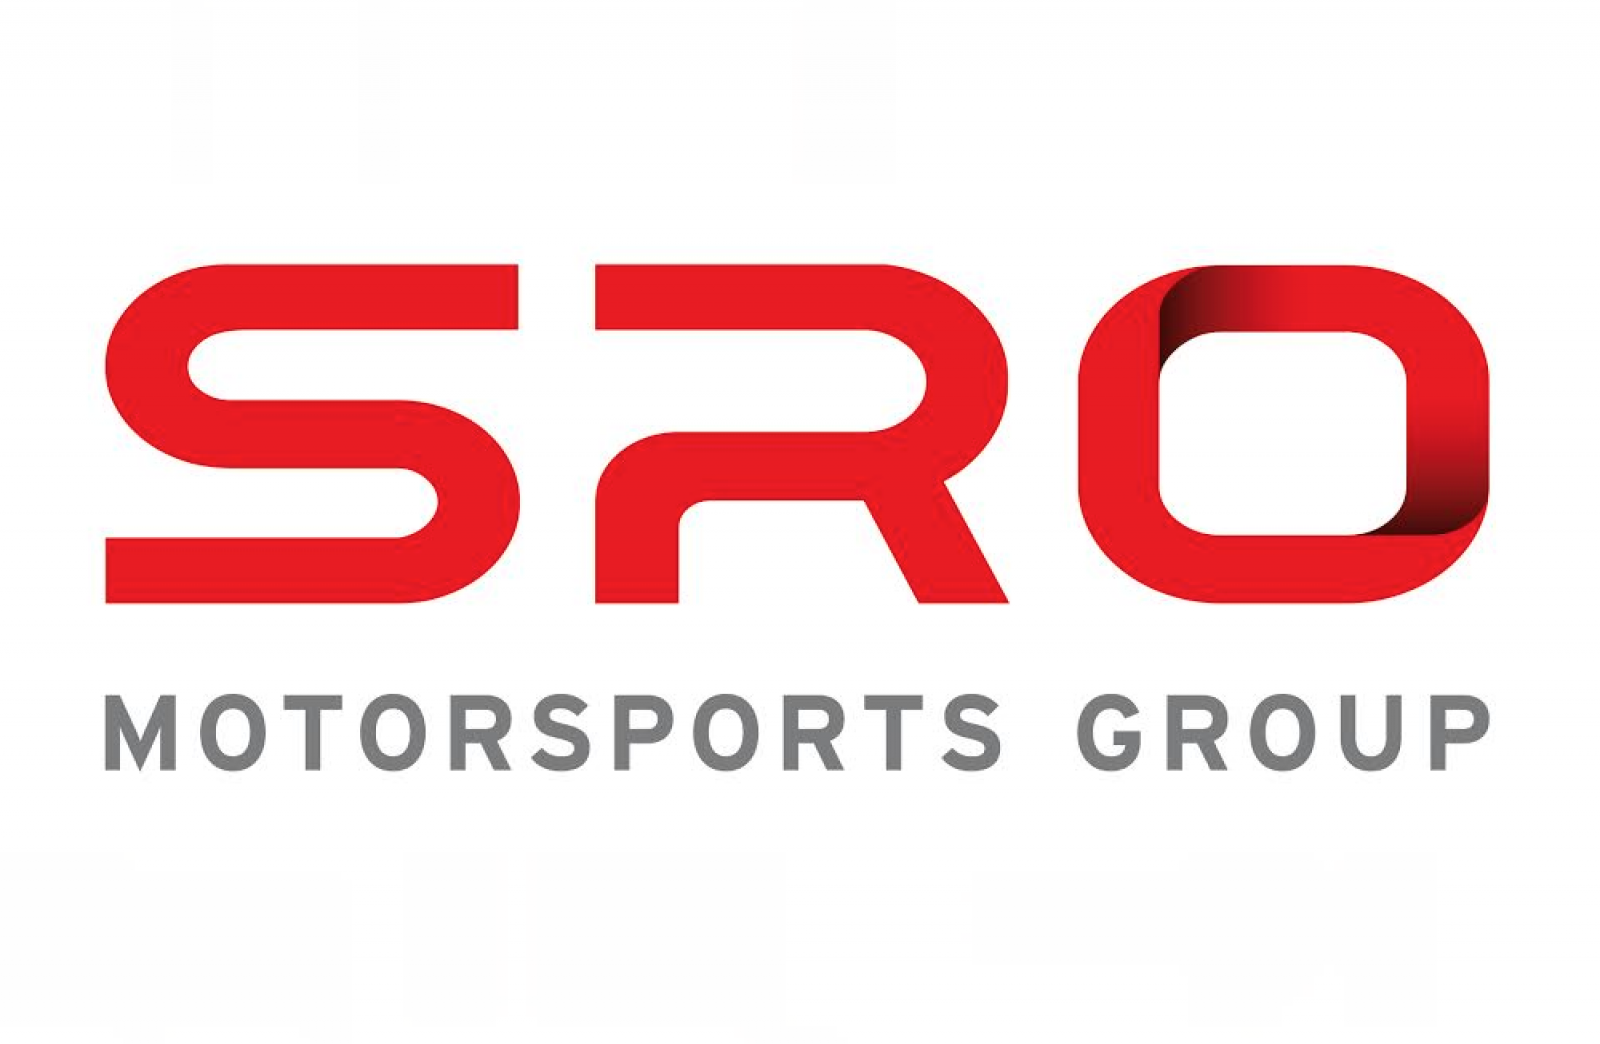 Statement from SRO Motorsports Group, RACB and the Circuit of Spa-Francorchamps